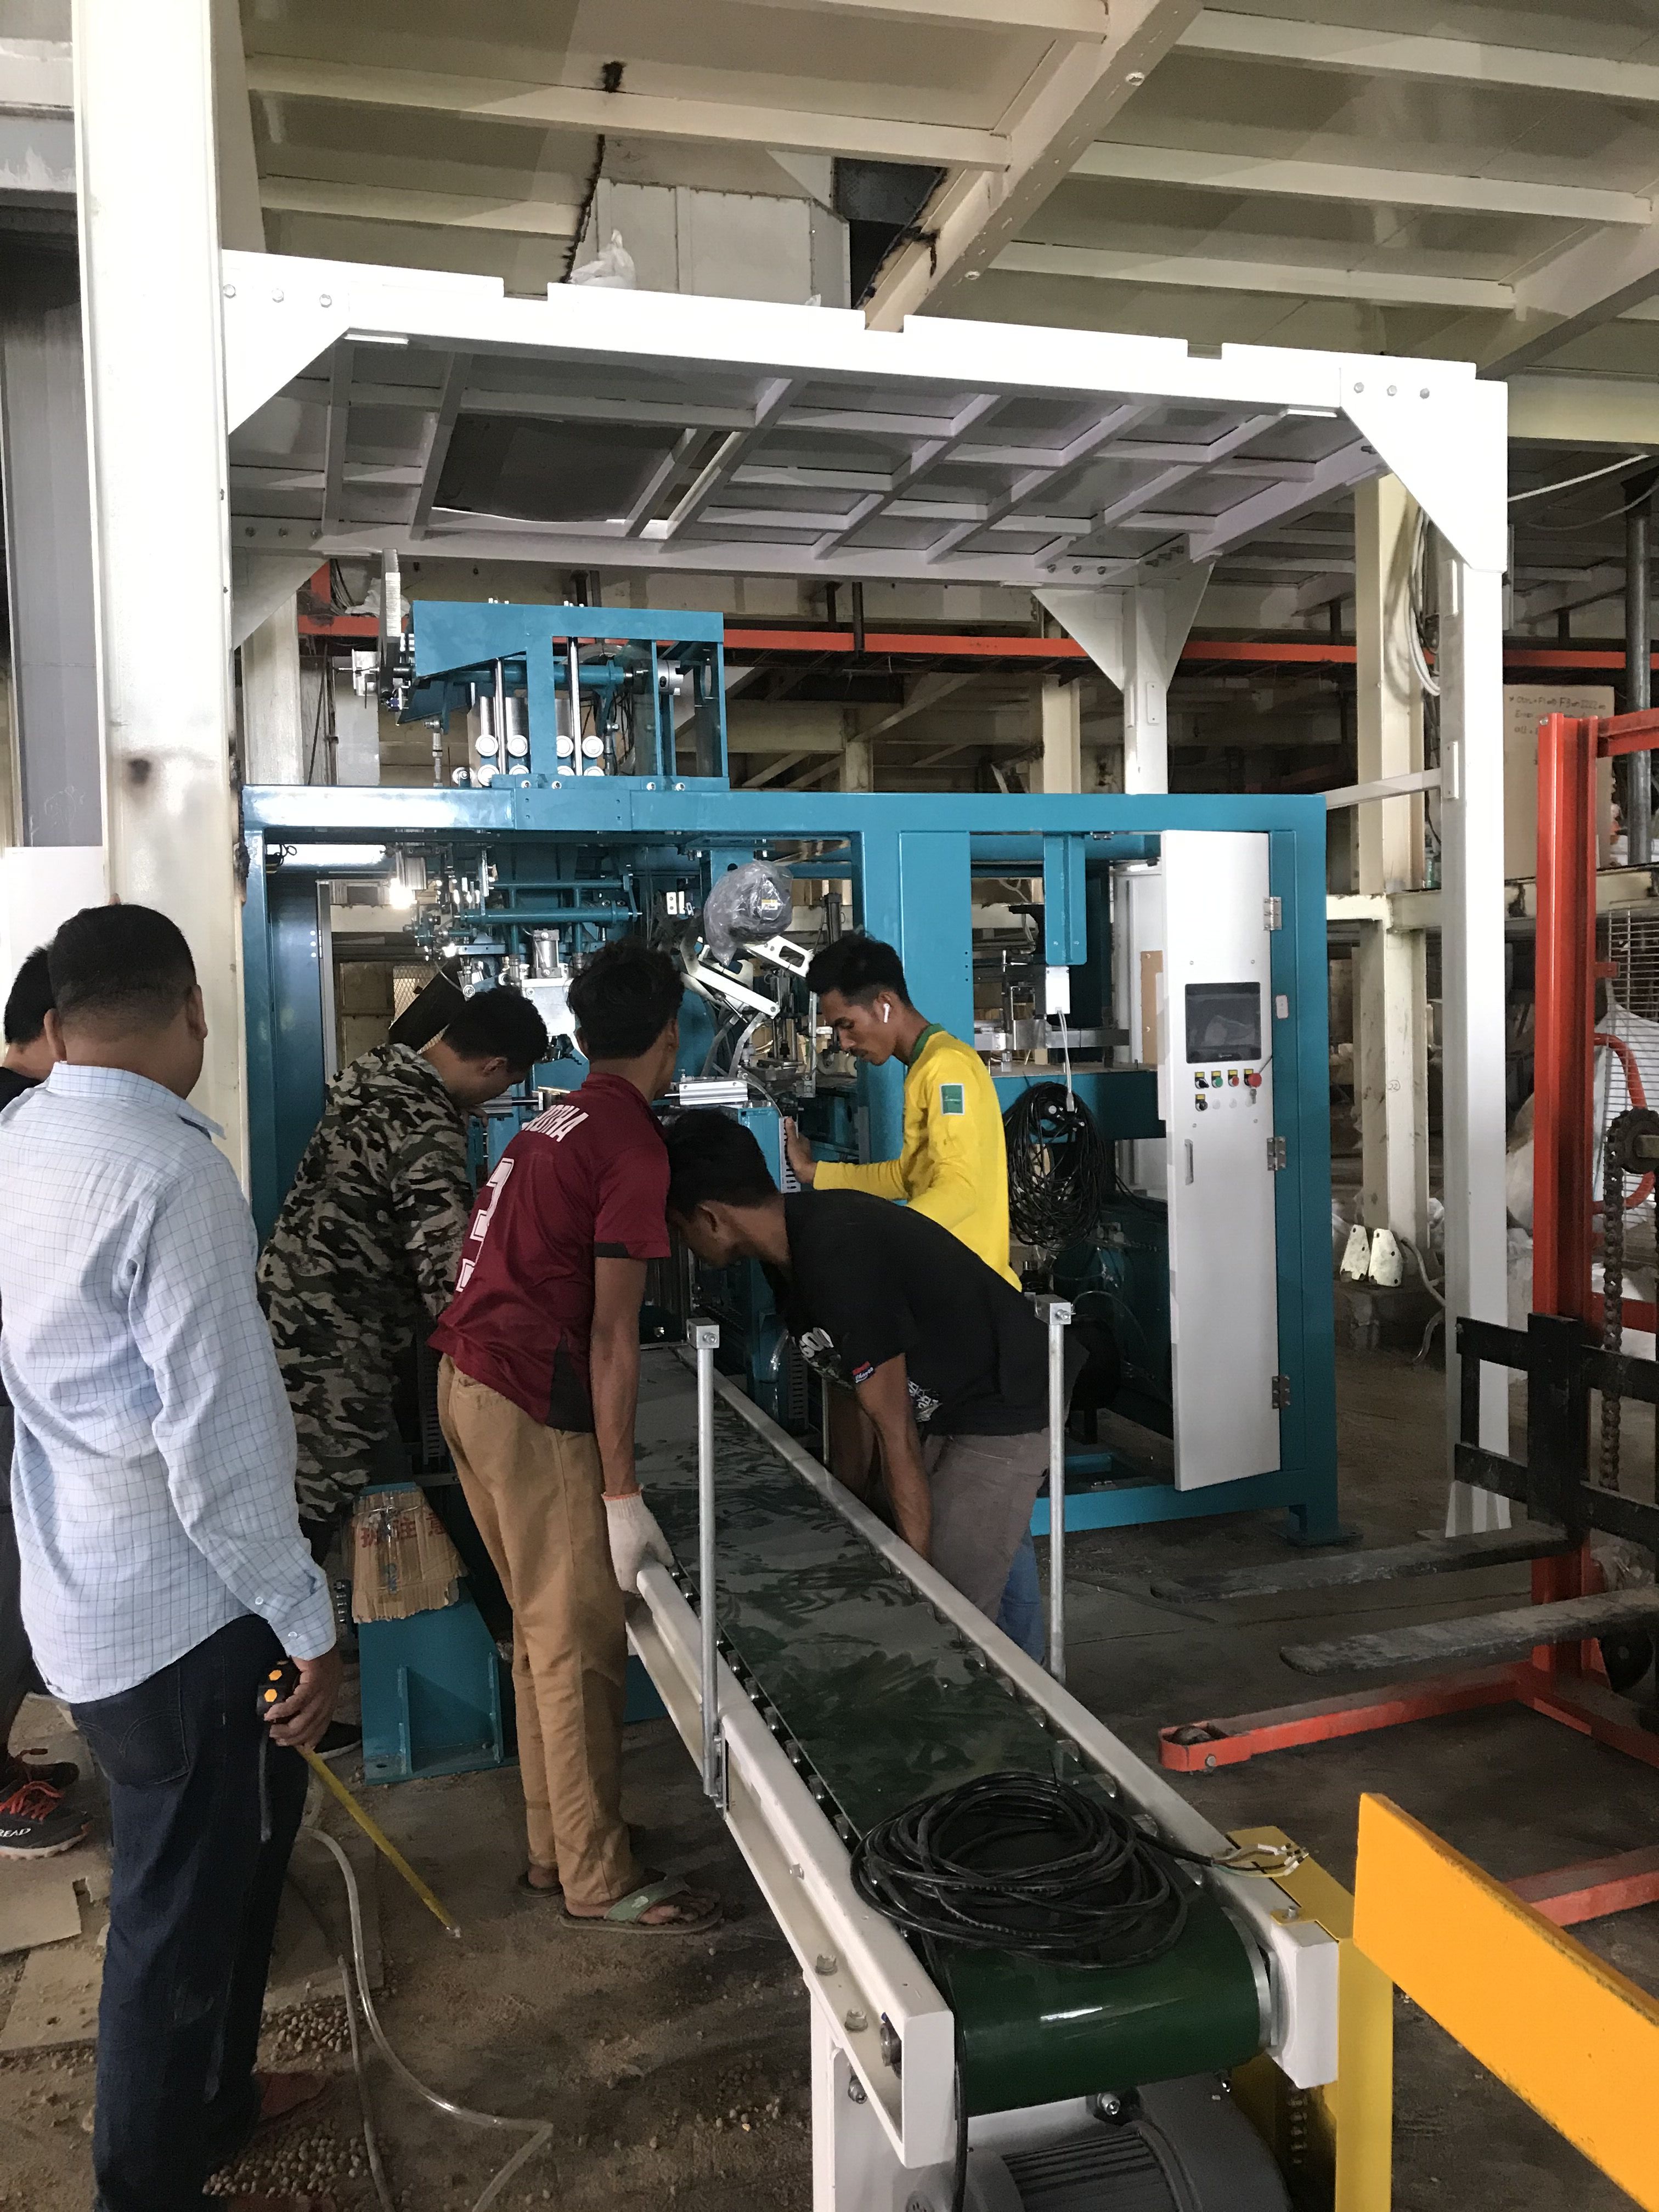 full automatic packing line Charcoal weigher and filller Automatic bagging machine Auto Packer for NPK and Urea fertilizers full automatic packaging line full automatic flour bagging palletizing and w